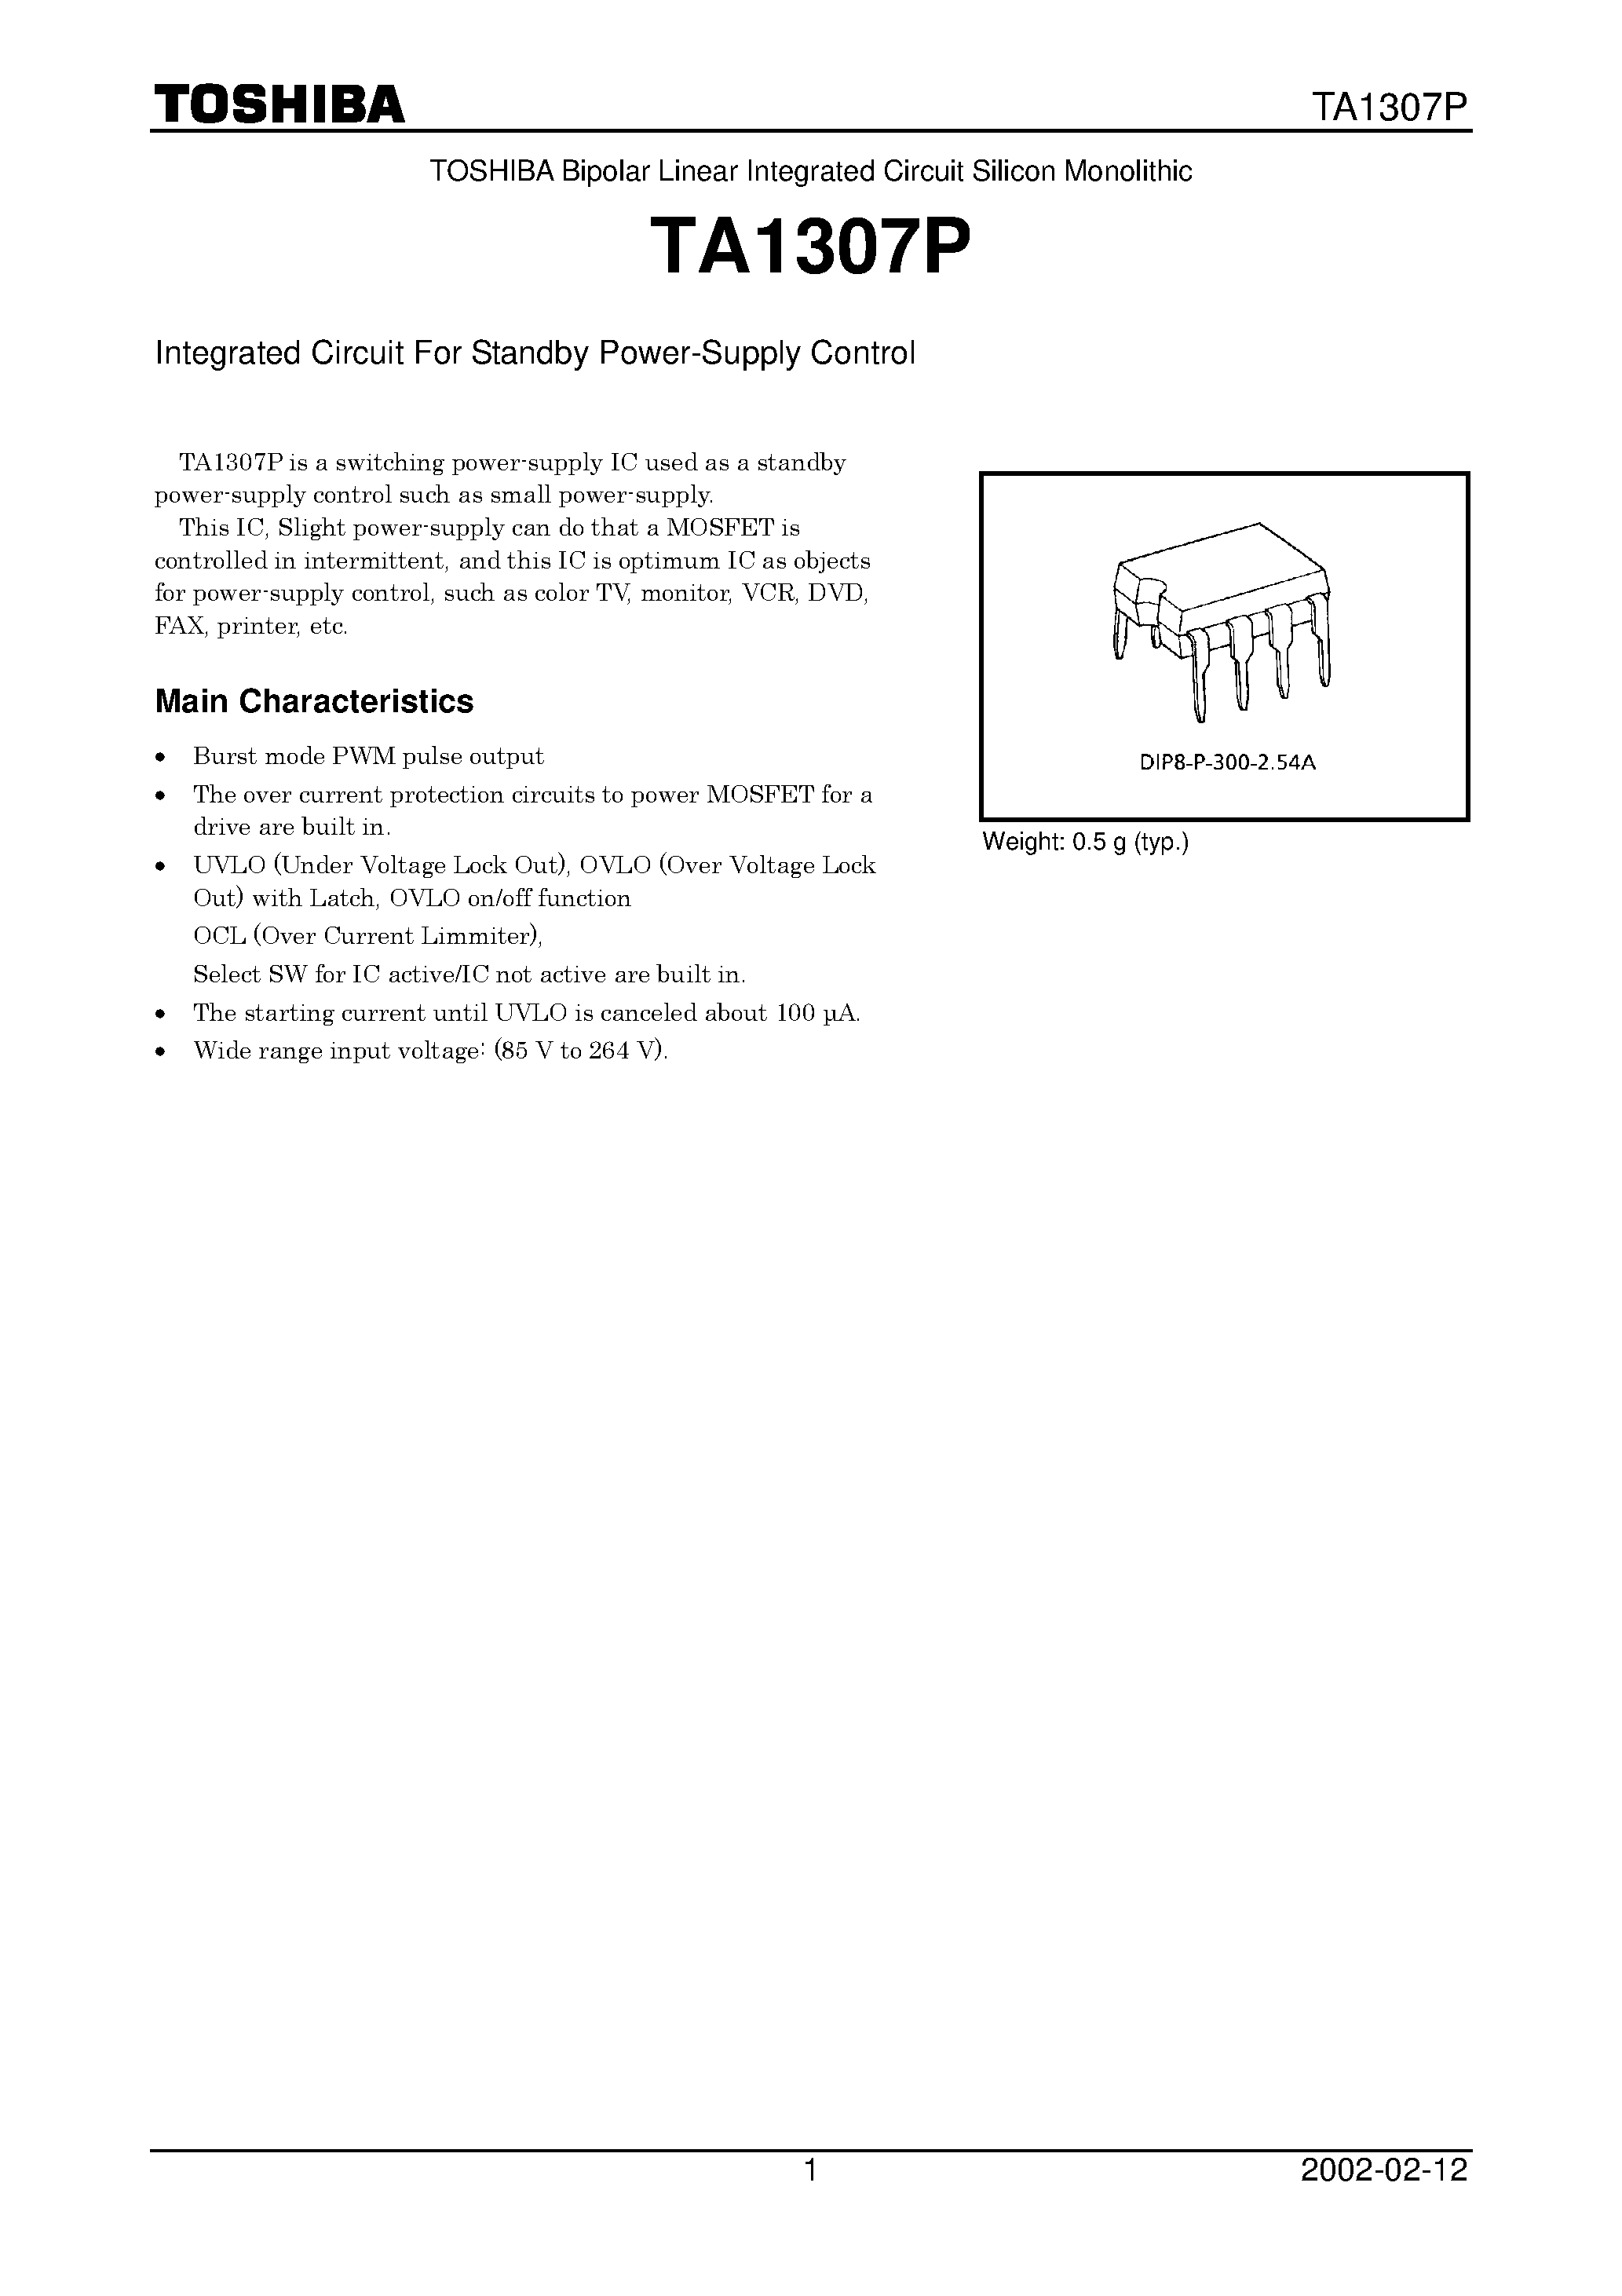 Datasheet TA1307P - Integrated Circuit For Standby Power-Supply Control page 1